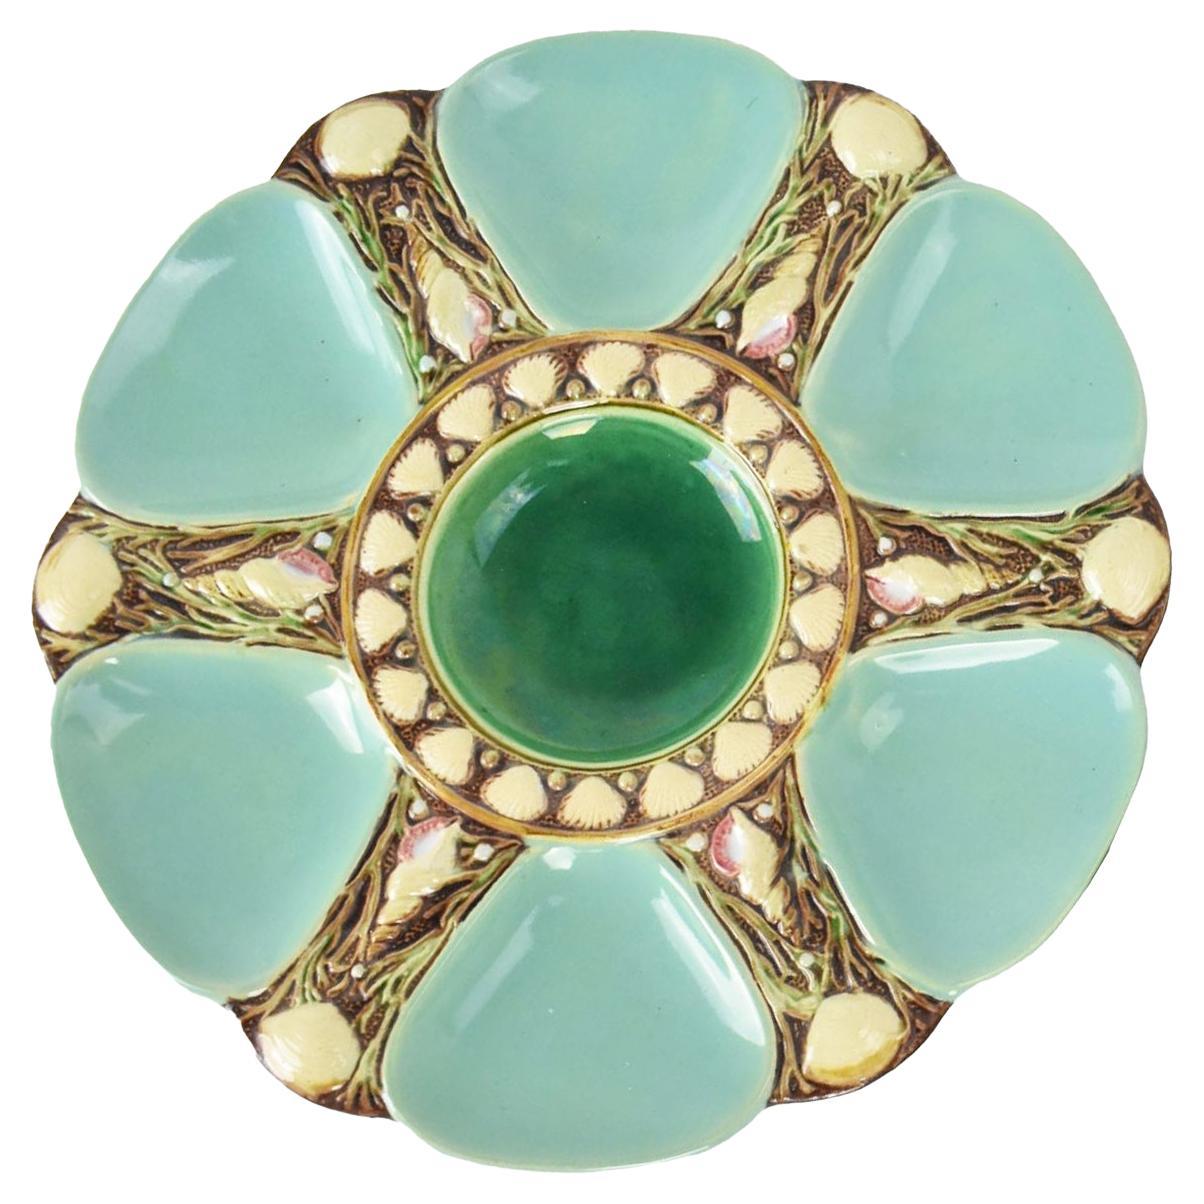 Majolica Oyster Plates by Minton, 1876